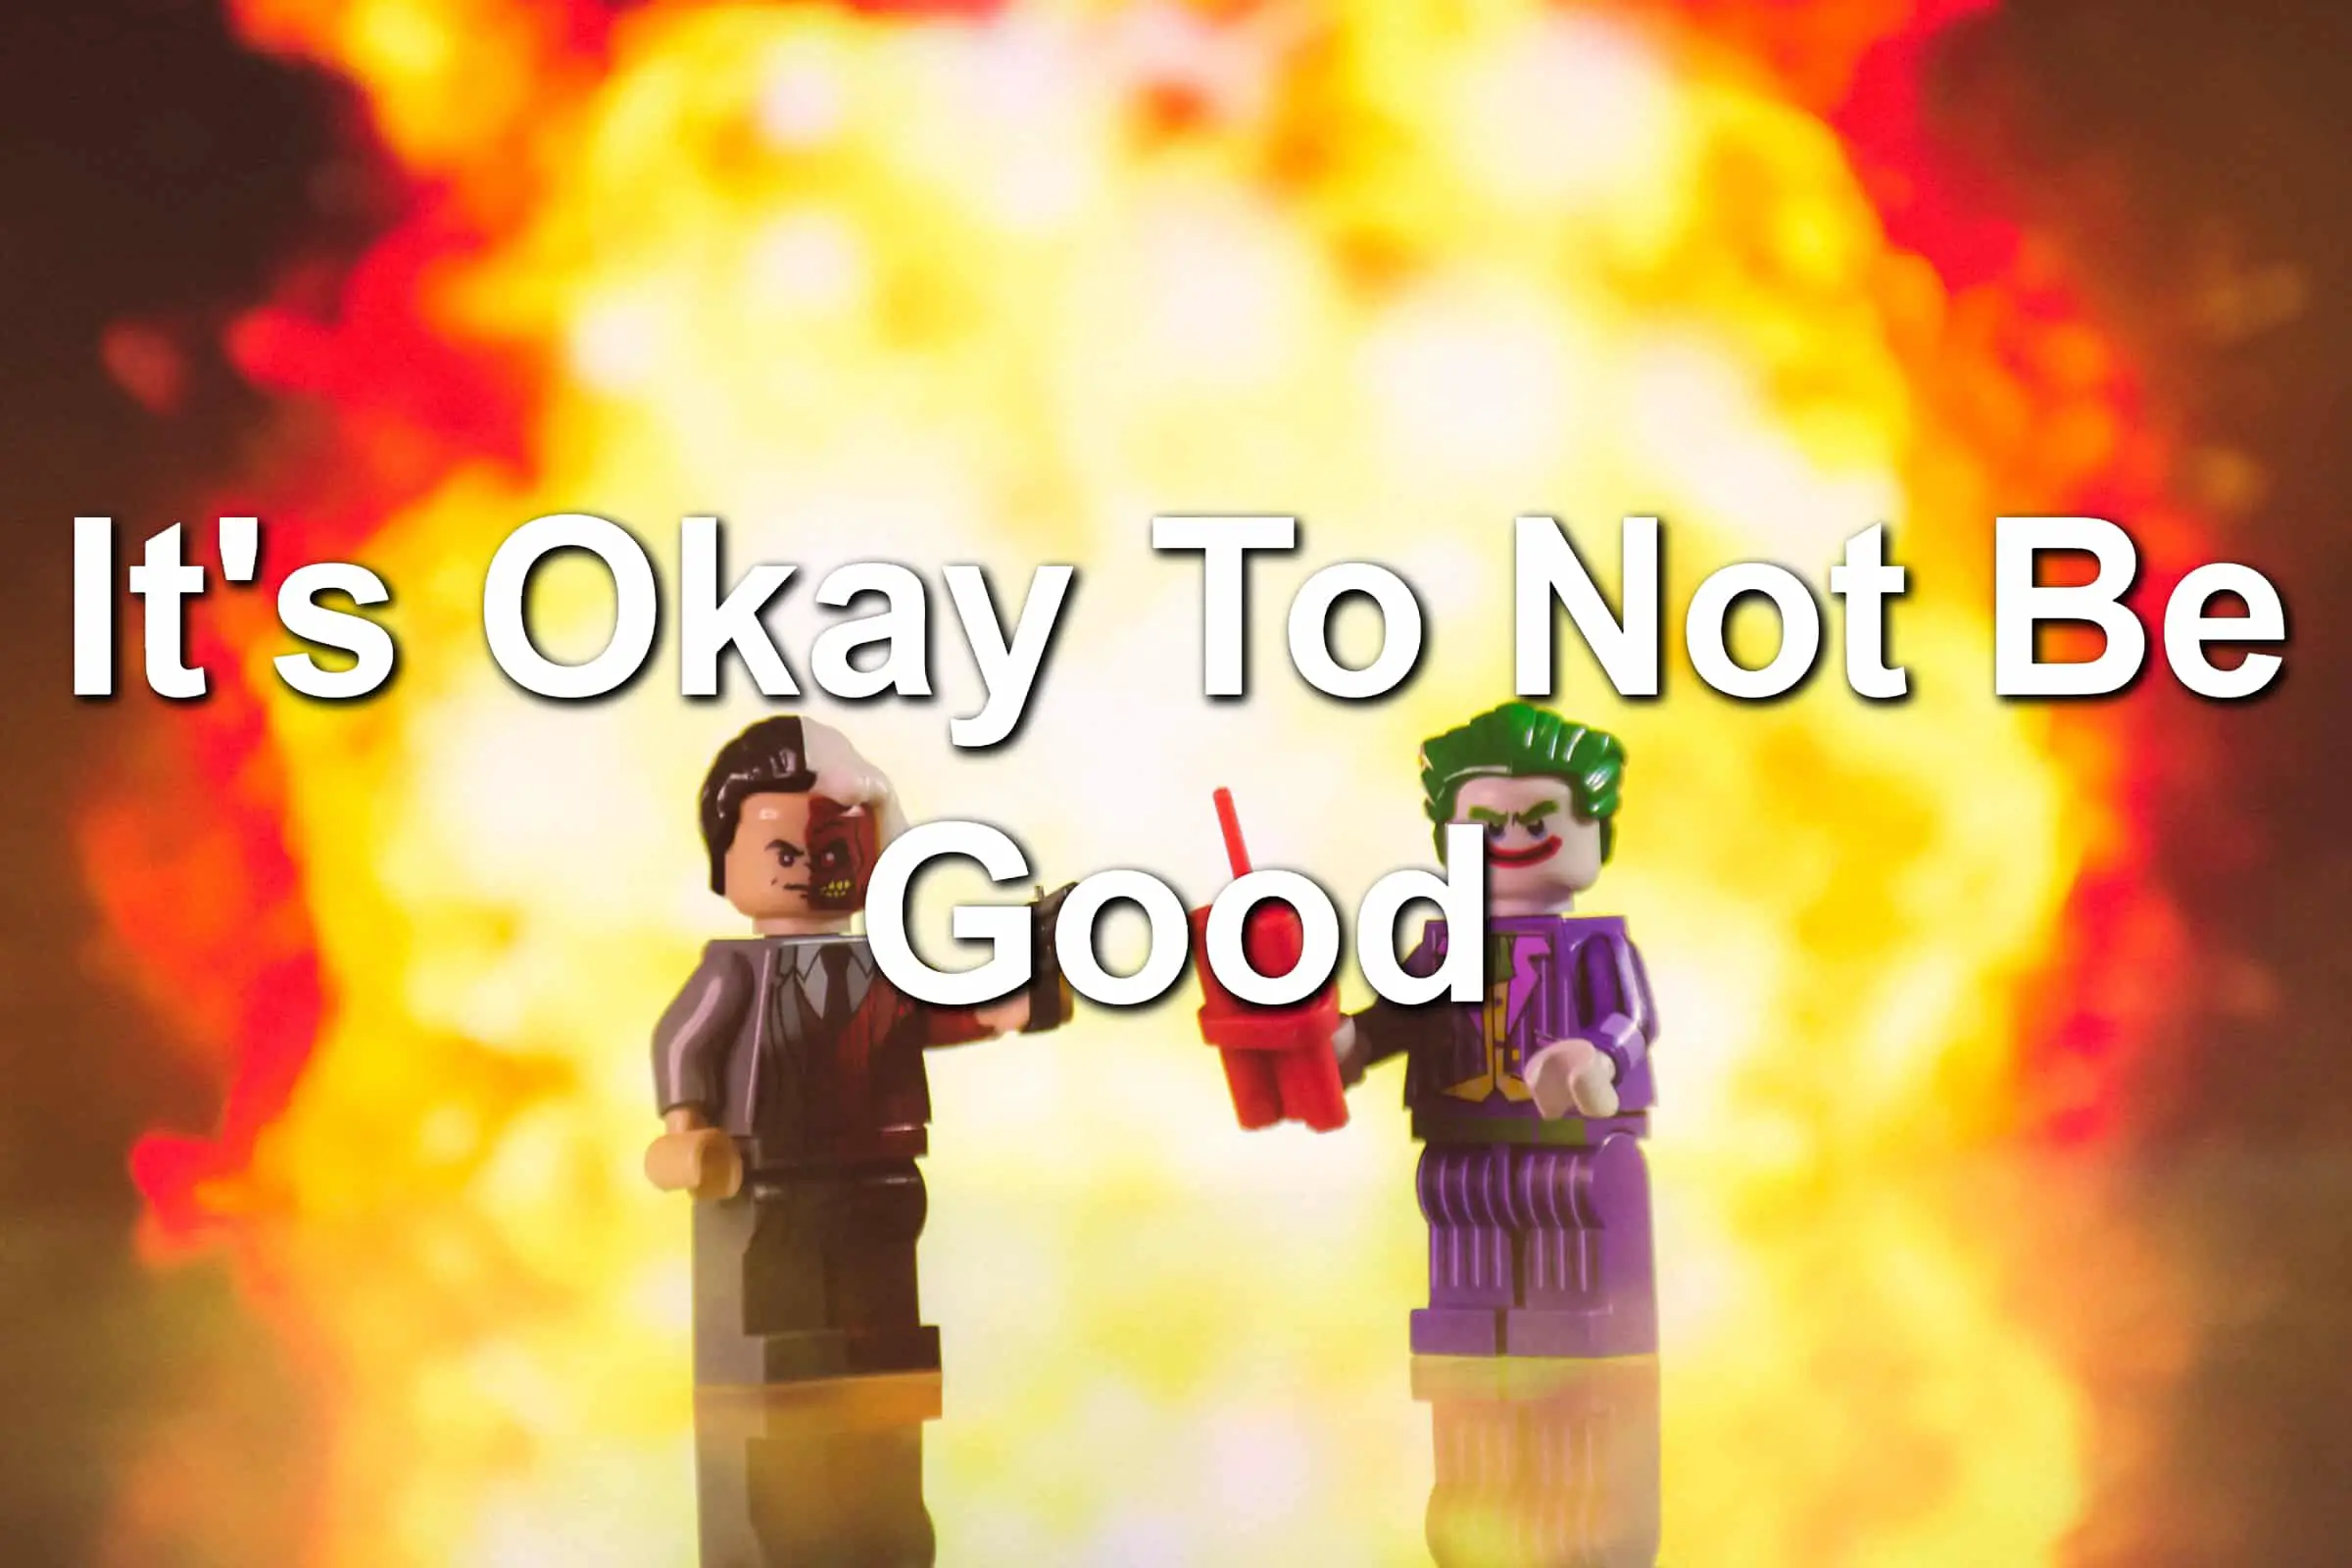 Lego figures of Batman villains Two-Face and Joker blowing something up (Explosion in background)